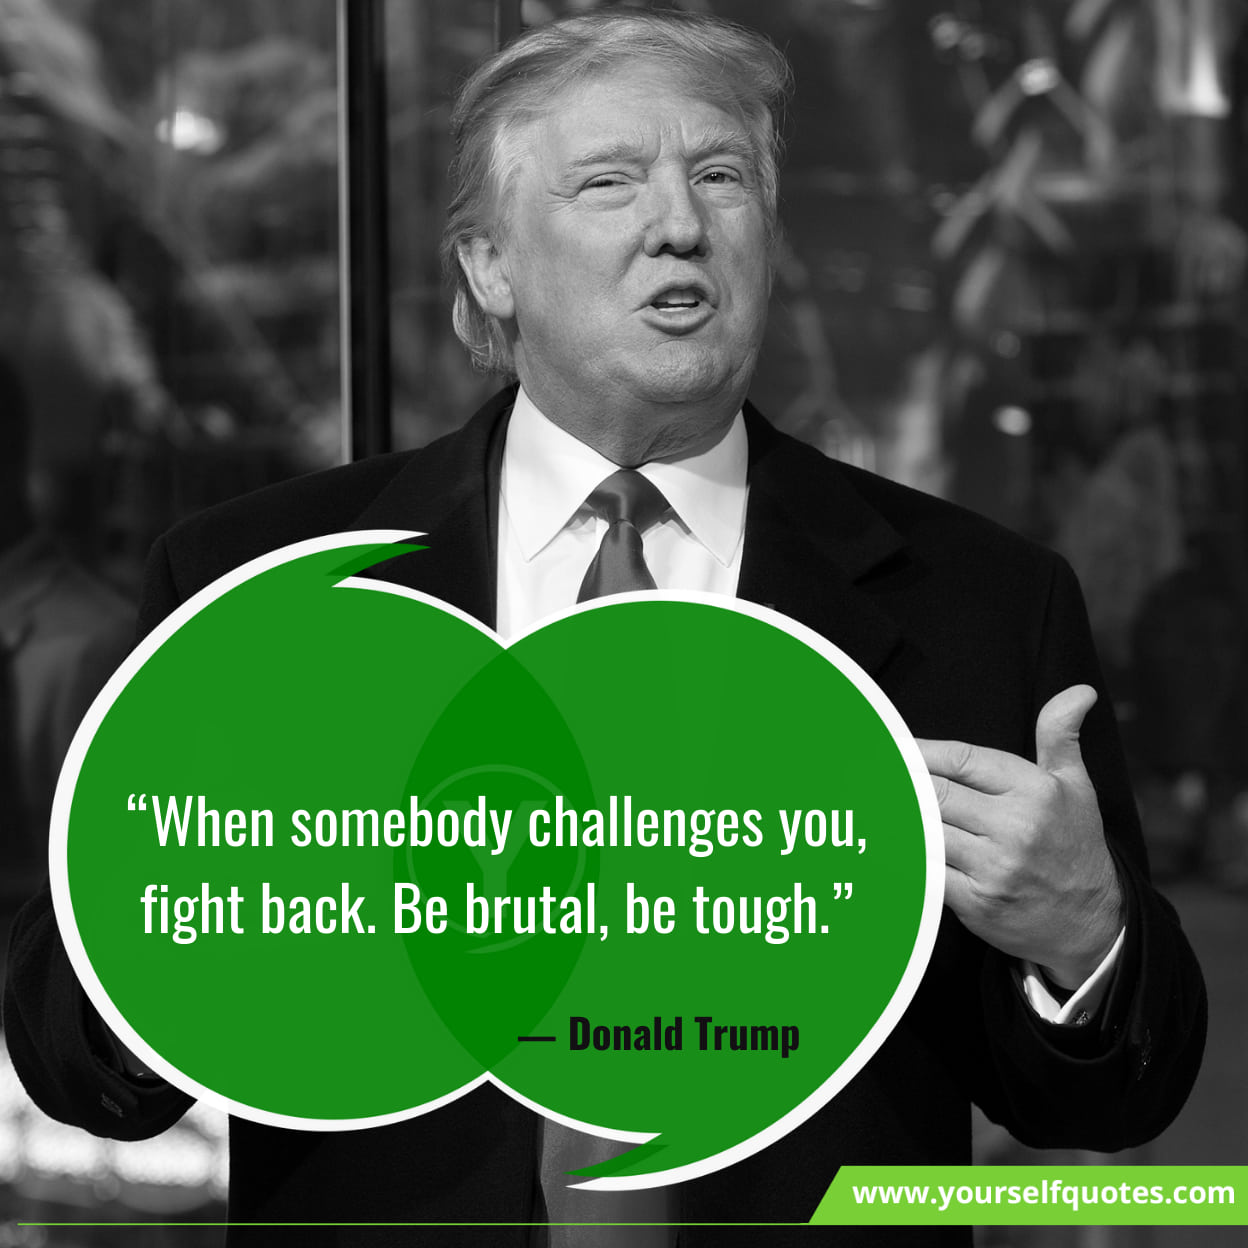 Donald Trump Quotes on Wall